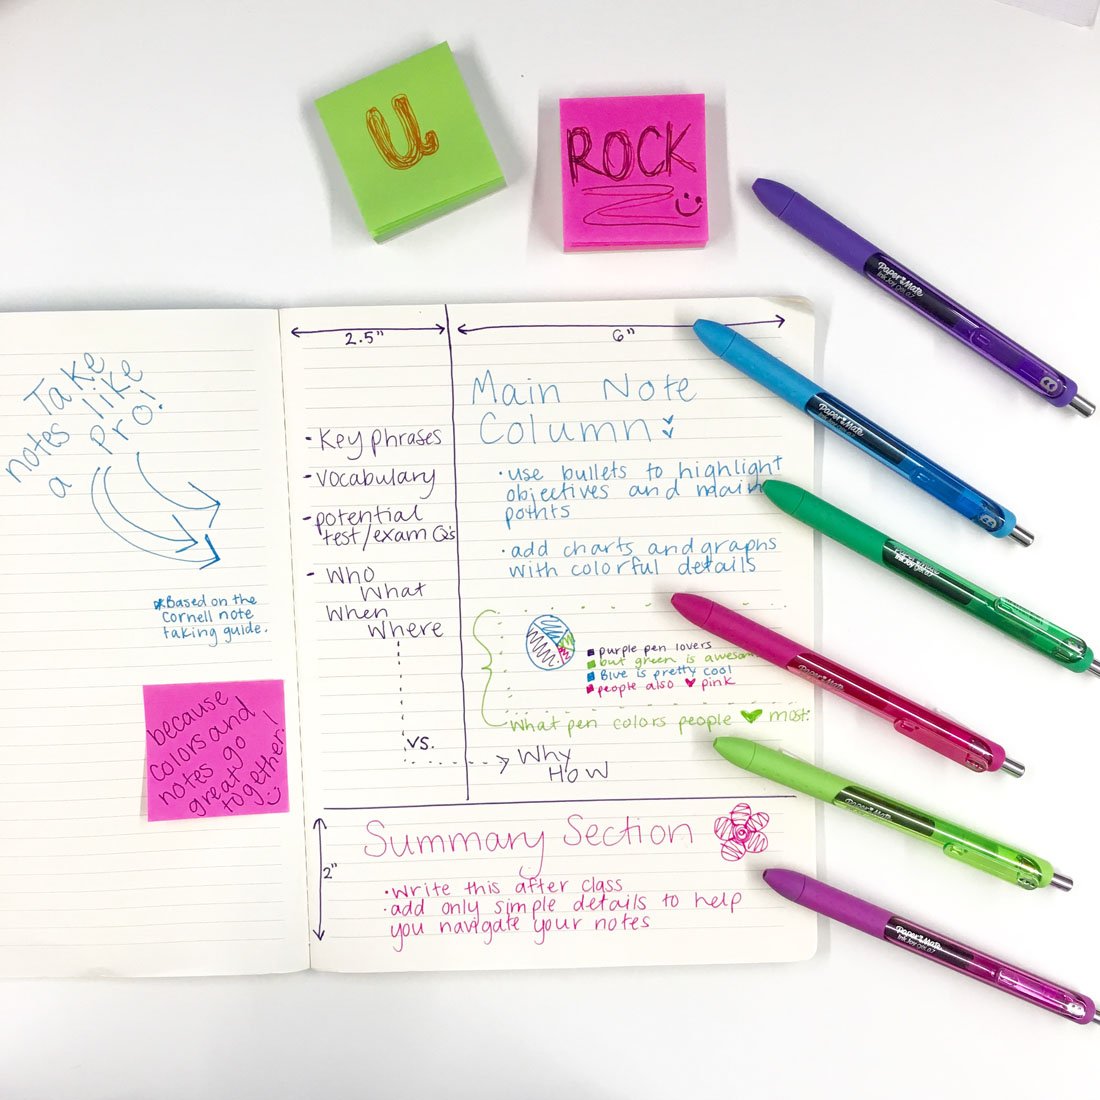 Colorful Pens for Paper People